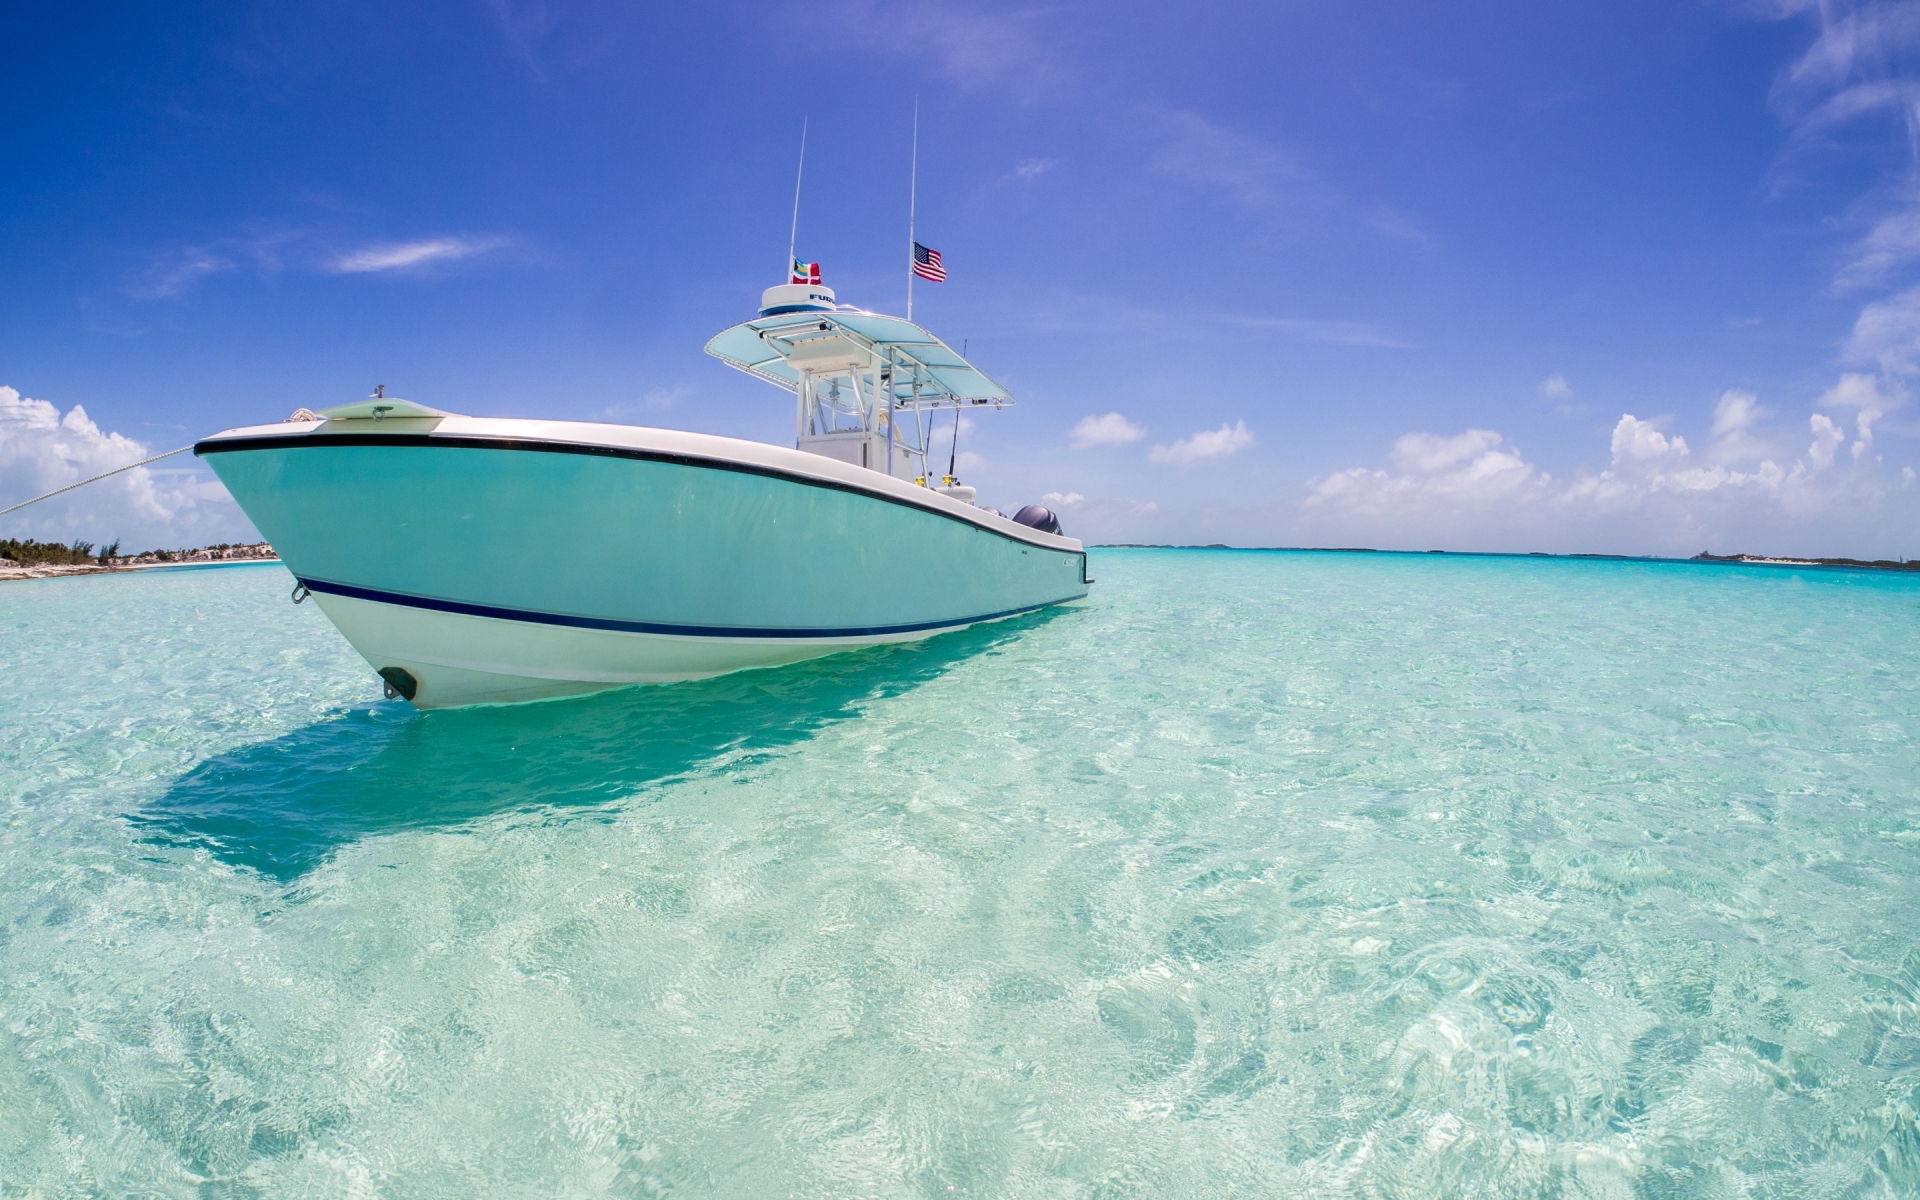 Boat in Paradise for 1920 x 1200 widescreen resolution